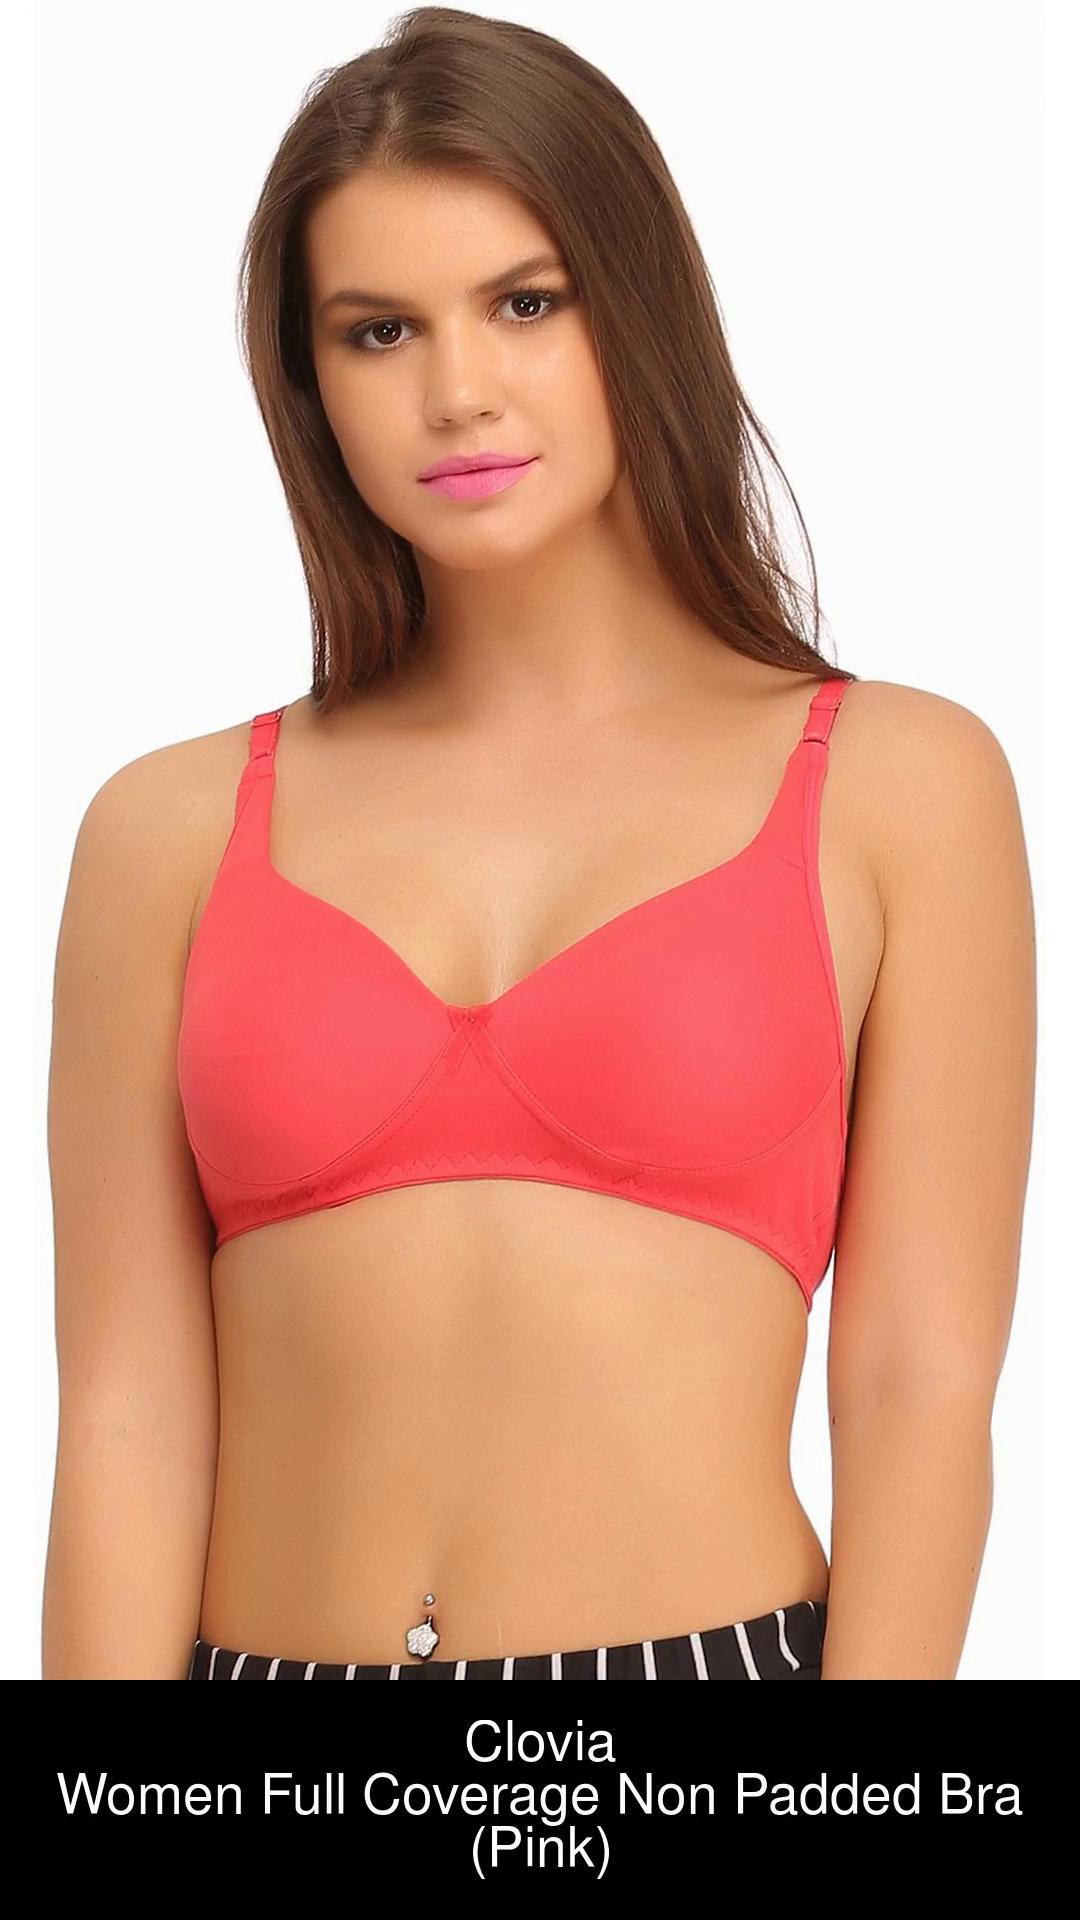 Buy Non-Padded Non-Wired Full Cup T-shirt Bra in Peach Colour - Cotton Rich  Online India, Best Prices, COD - Clovia - BR1148B34